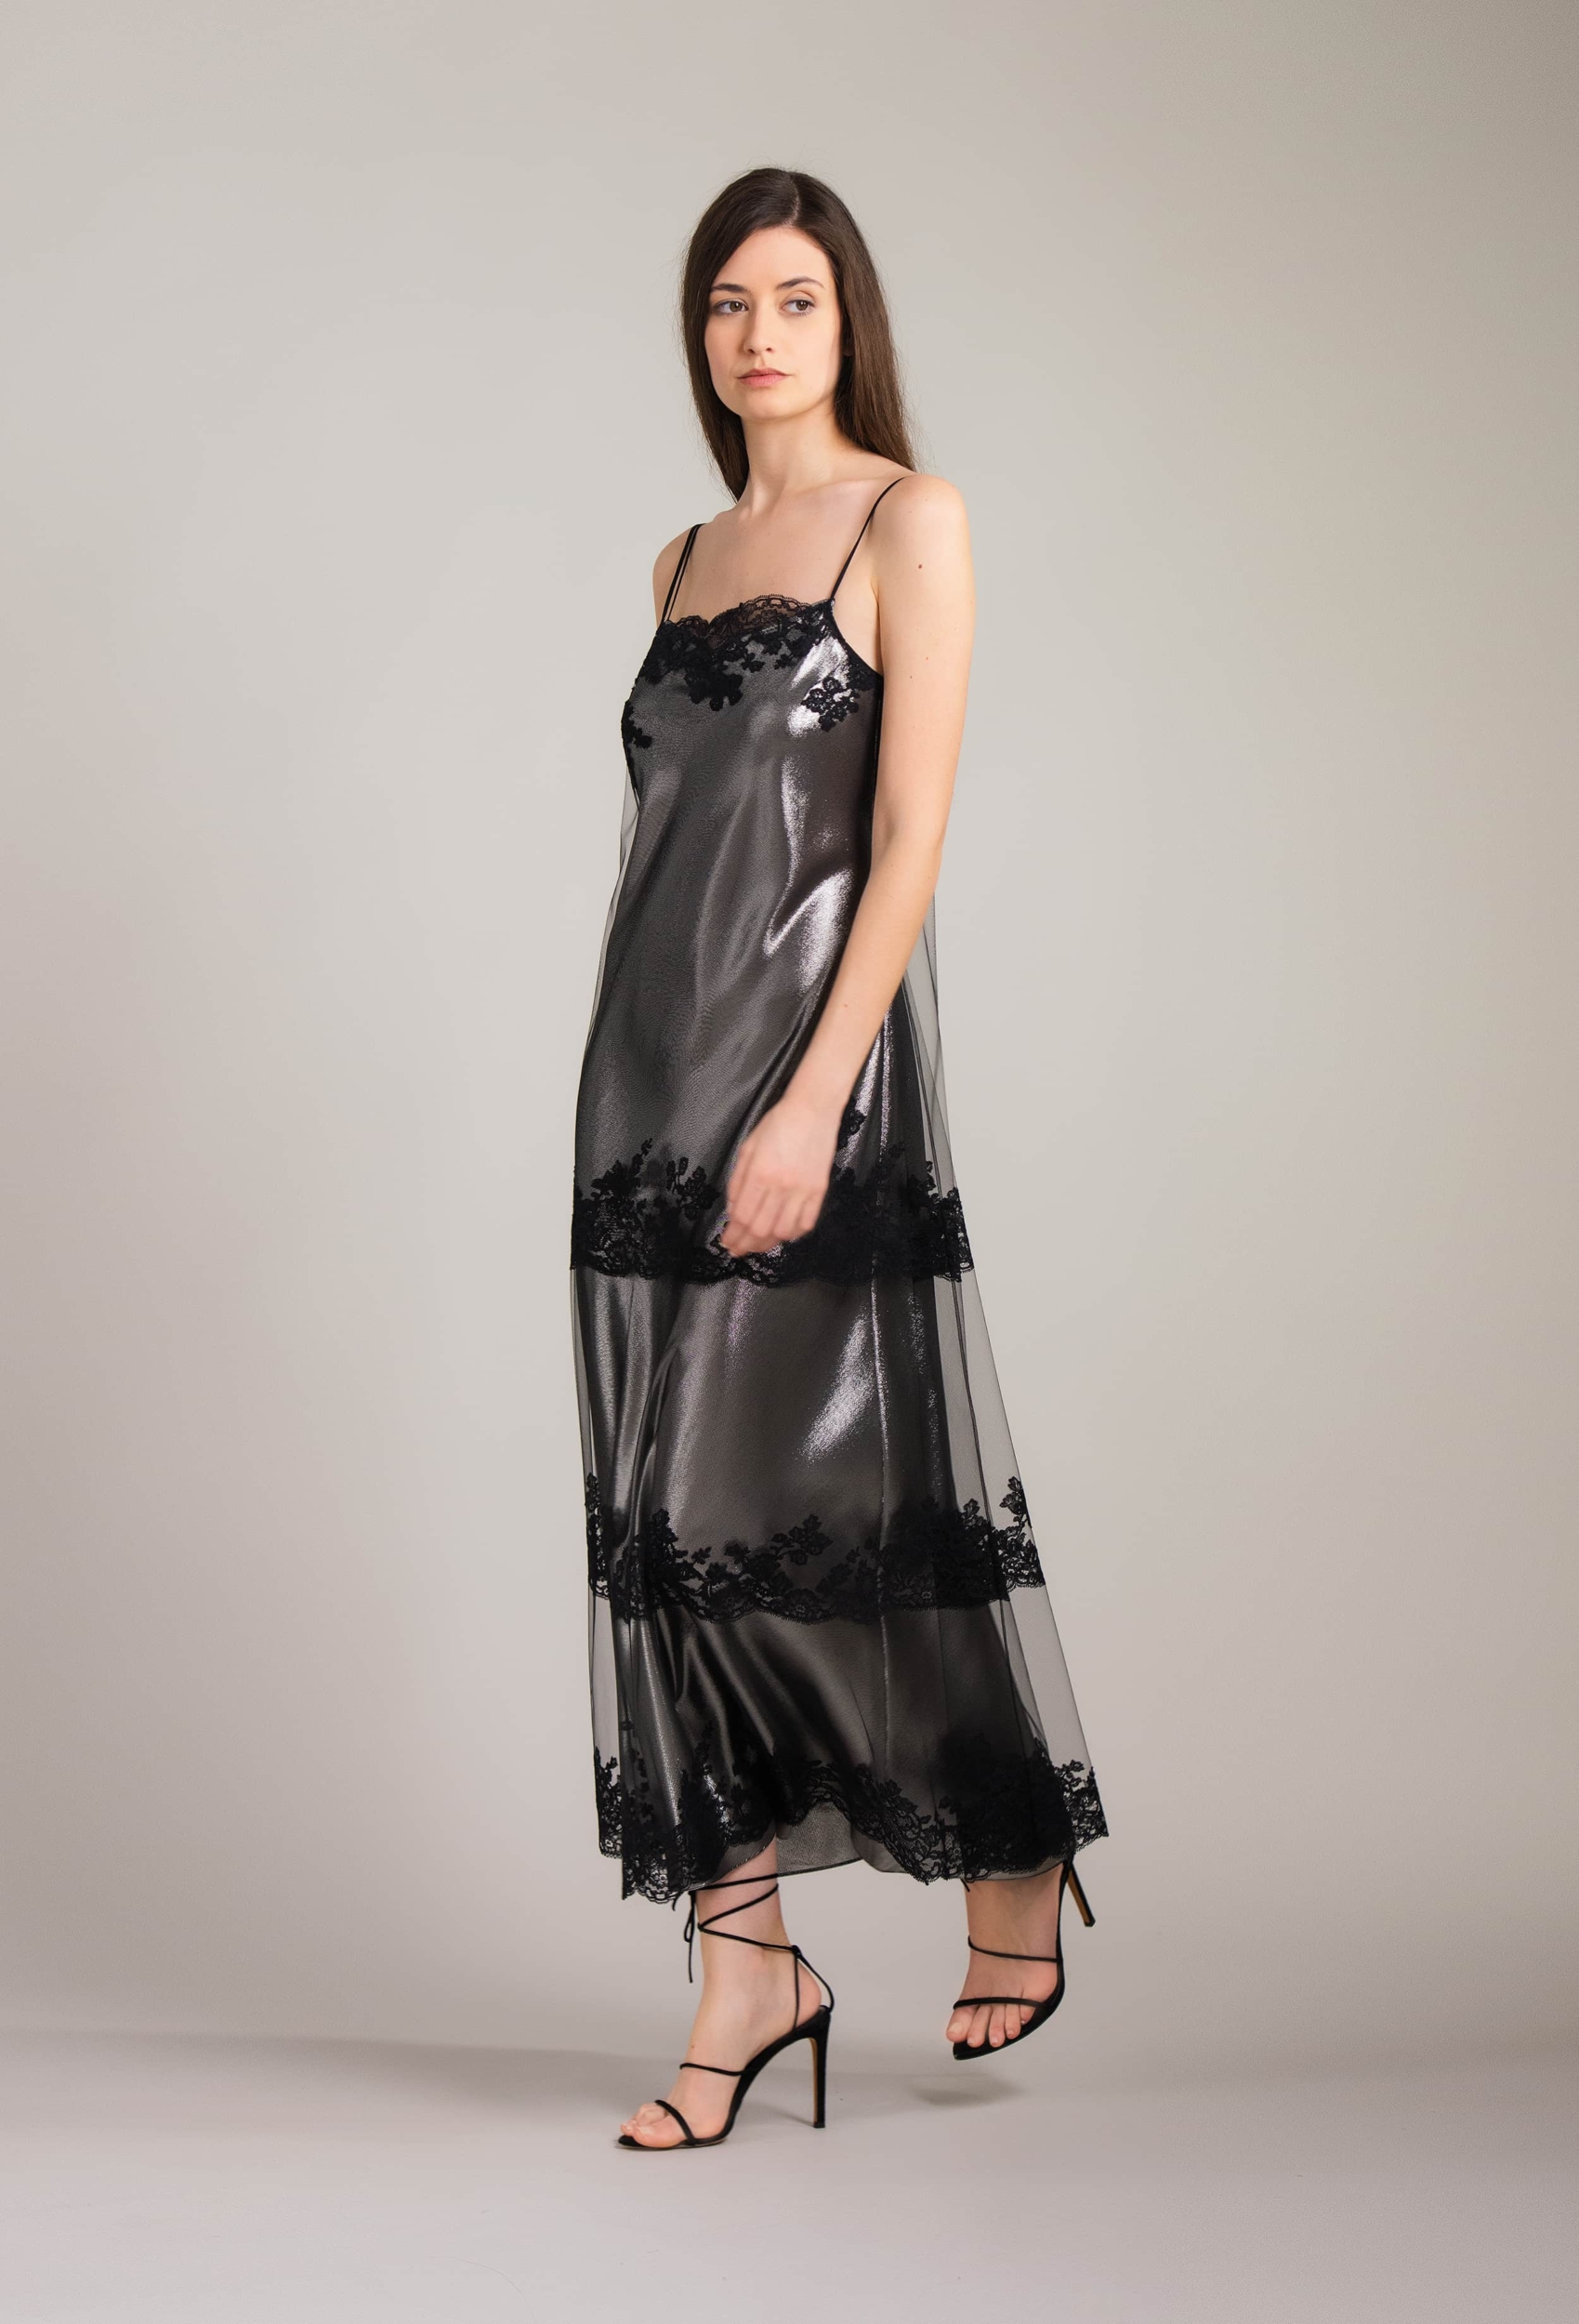 Carine Gilson, Belted Satin-trimmed Embroidered Silk-tulle Robe, Black, small,medium,large,x large